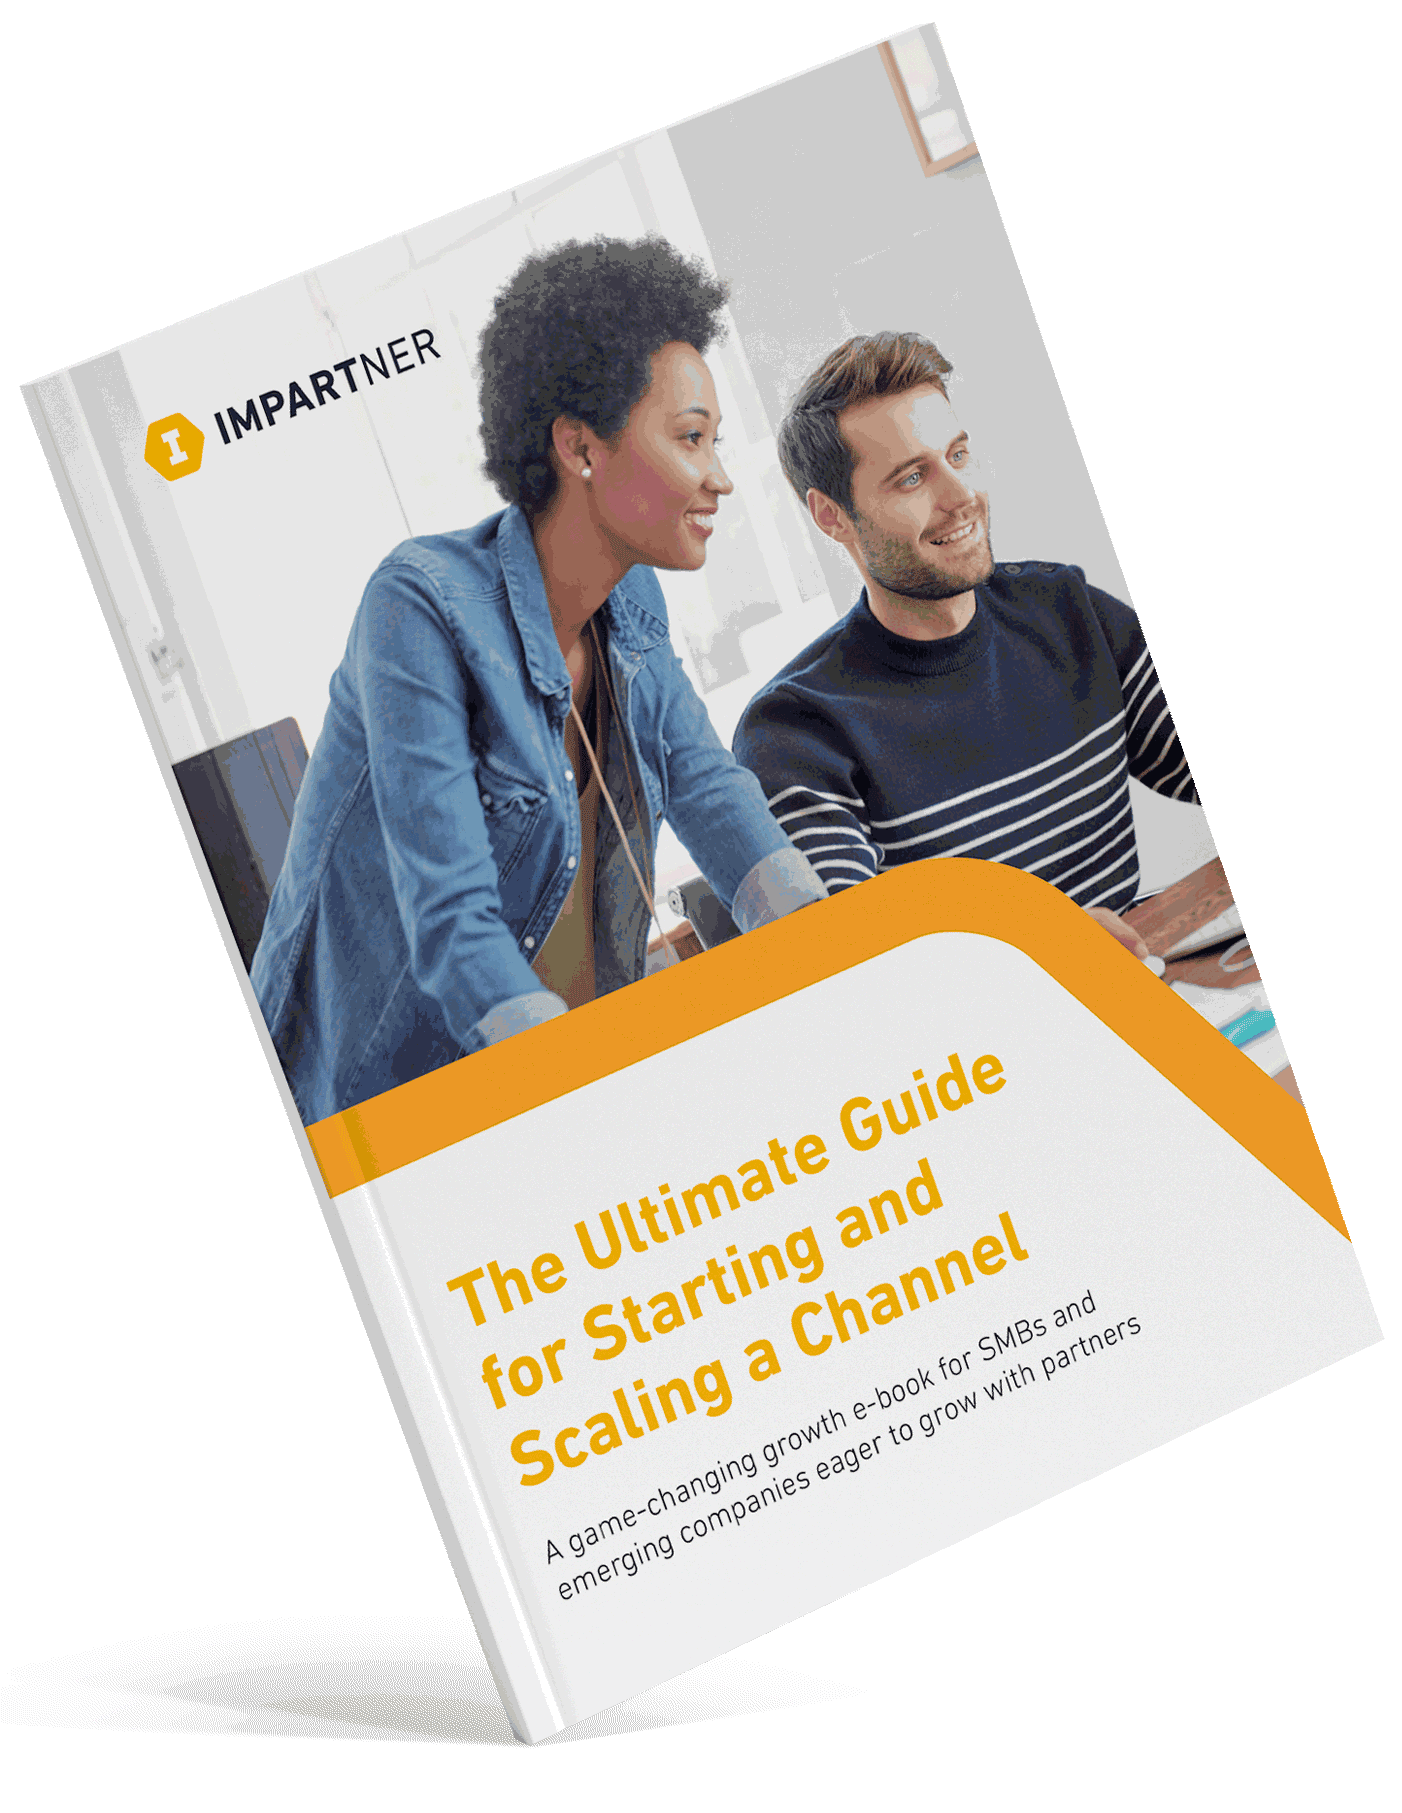 The Ultimate Guide to Starting and Scaling a Channel